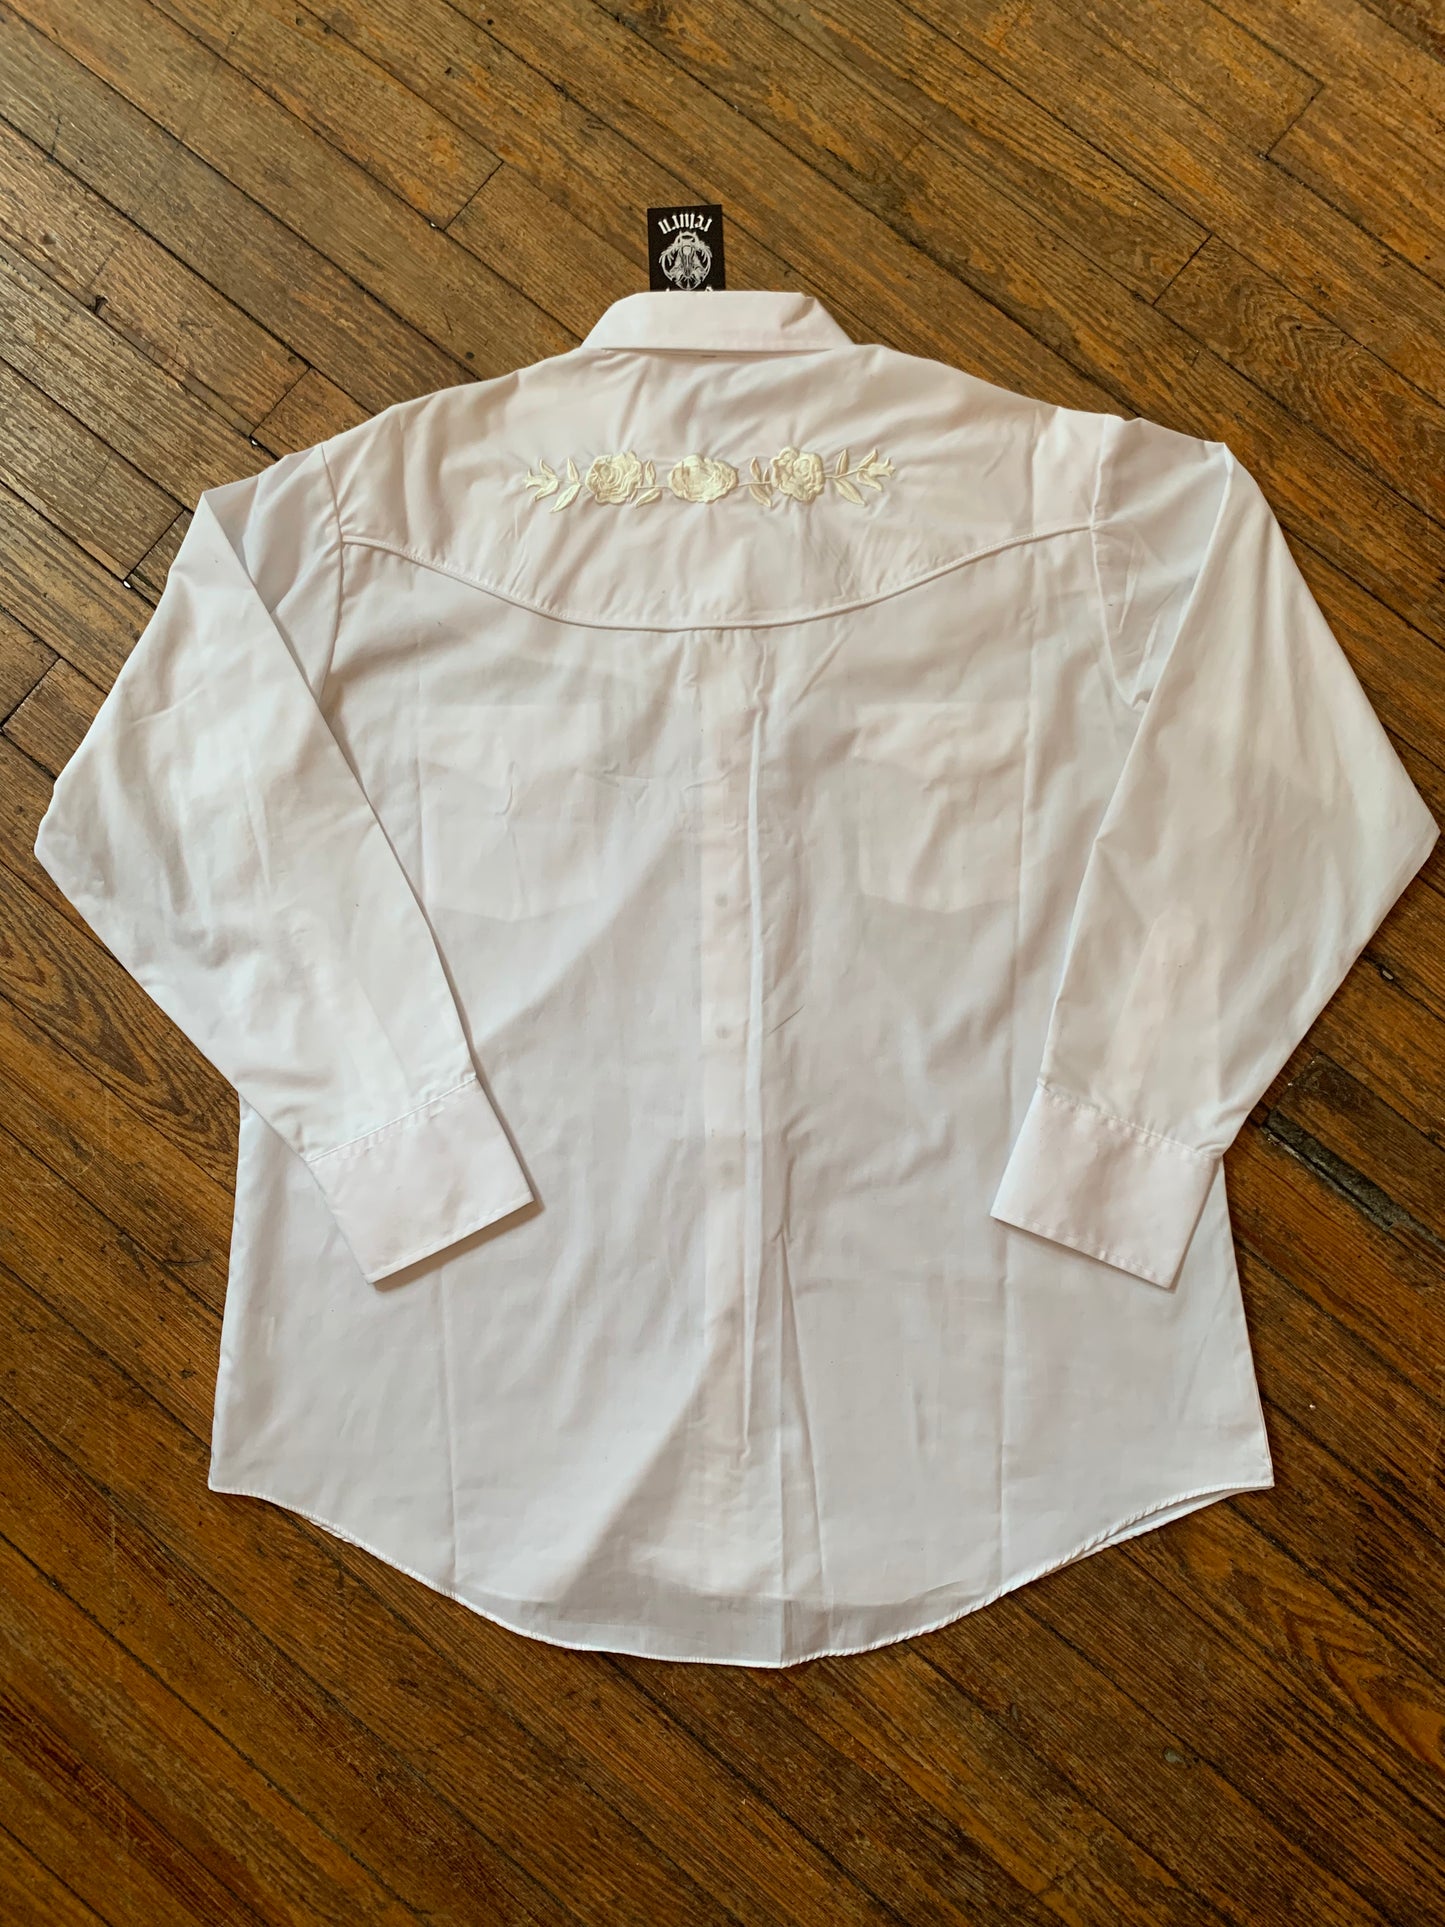 Vintage Western Floral Embroidered White Pearl Snap Shirt